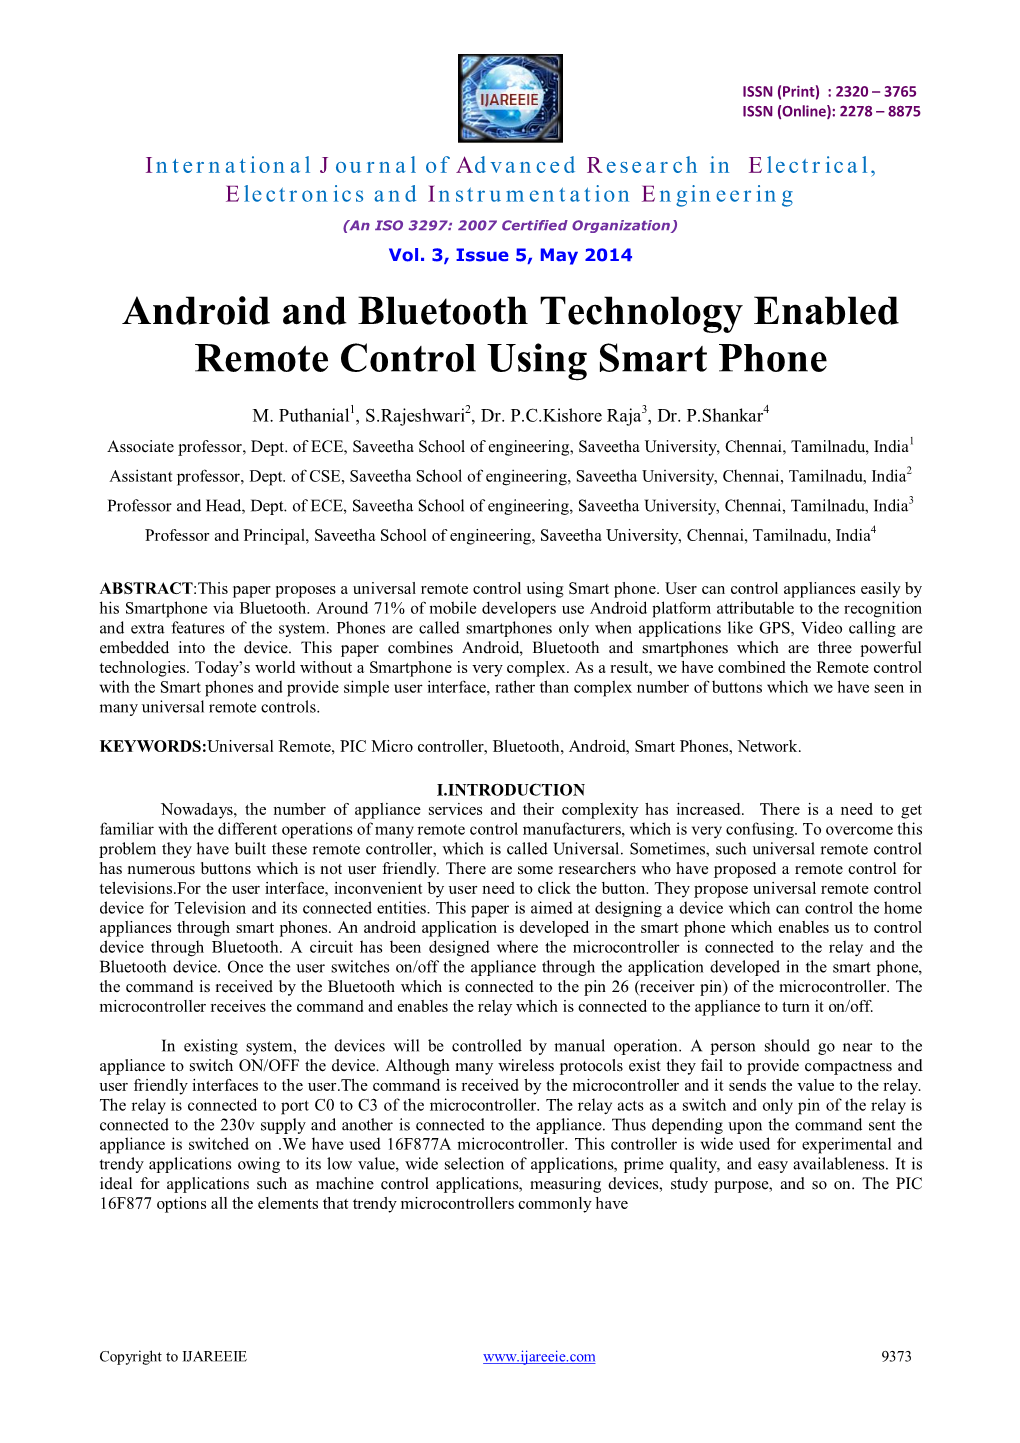 Android and Bluetooth Technology Enabled Remote Control Using Smart Phone